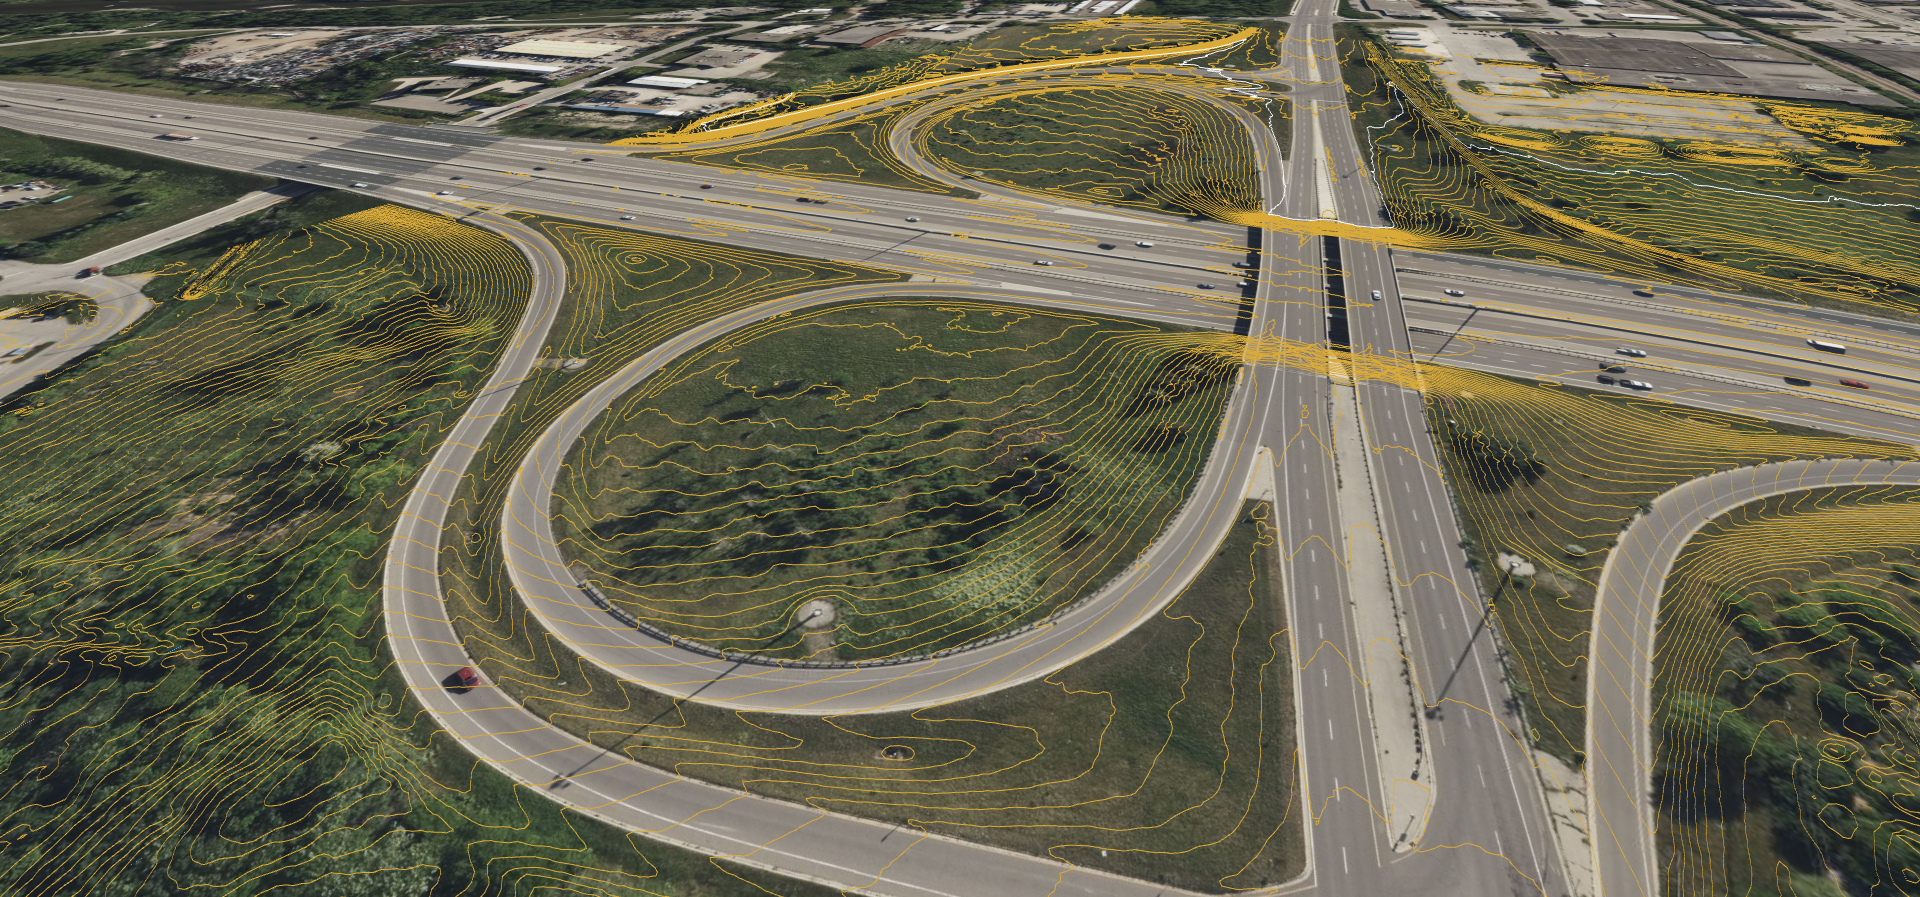 1 foot contours on an aerial map of a highway ramp